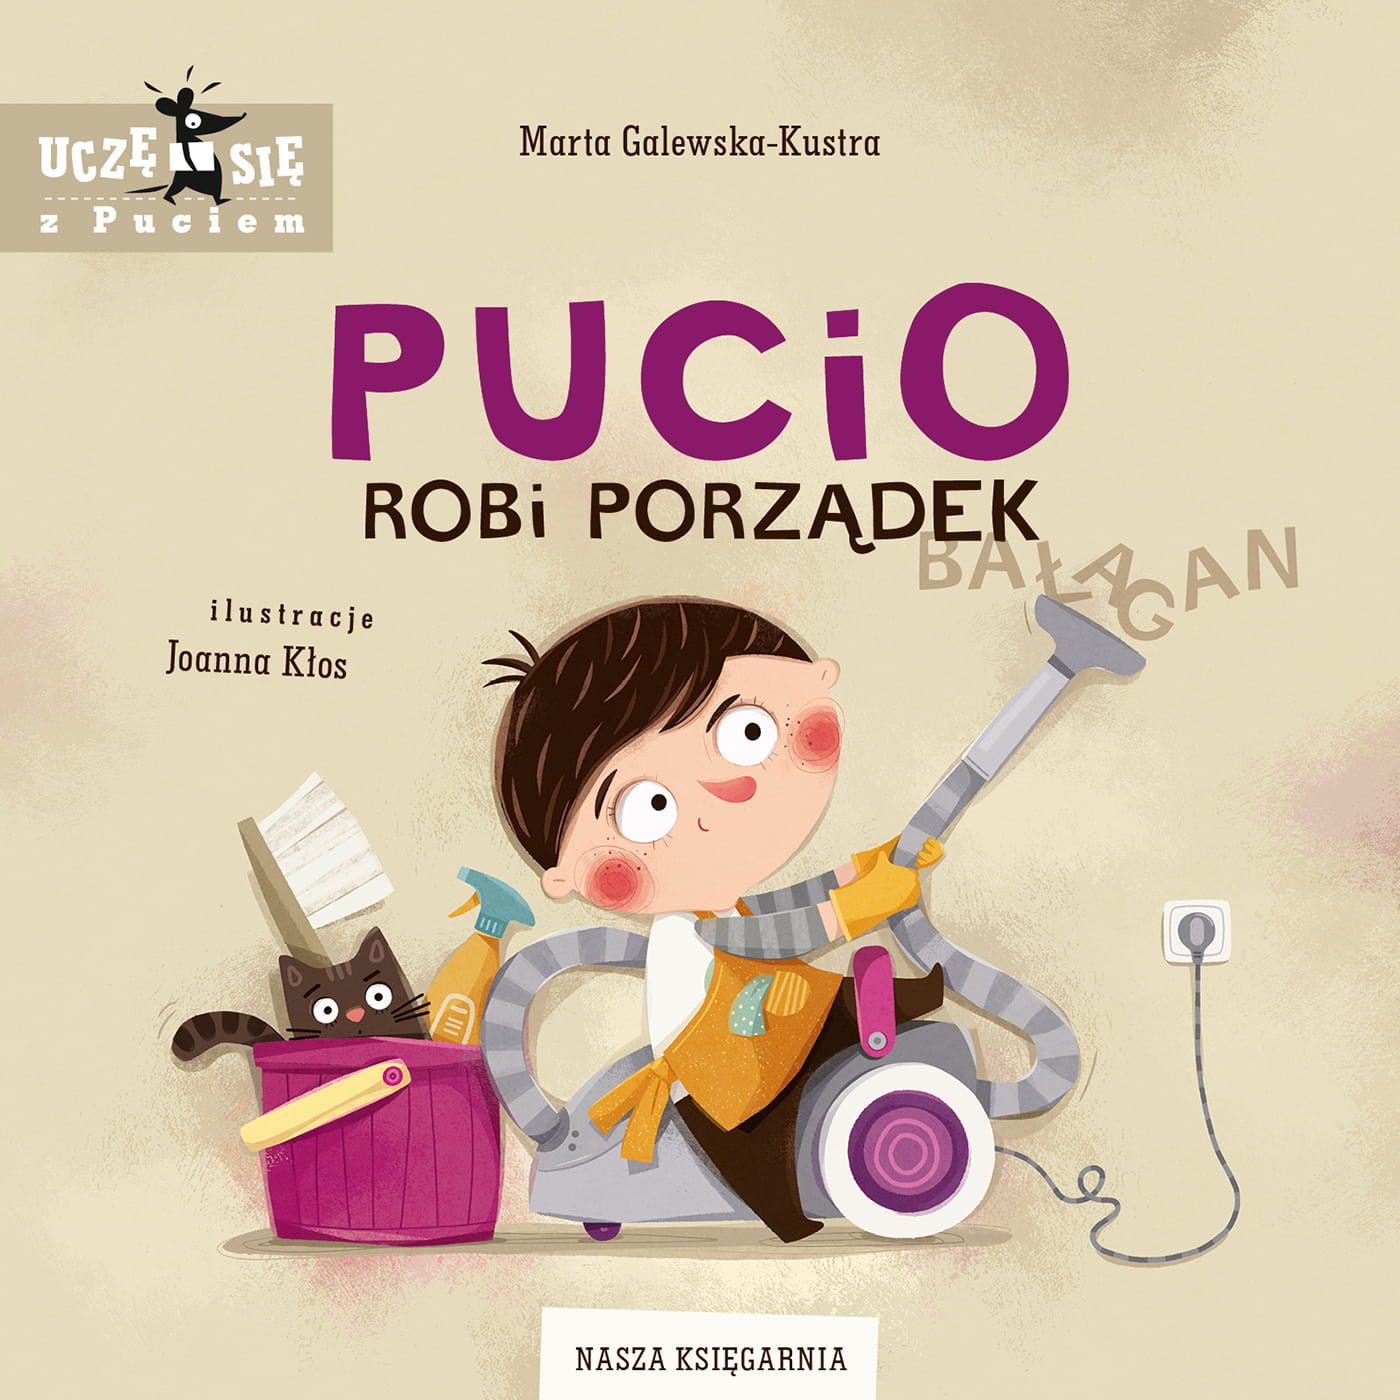 Our bookstore: Pucio is ordering